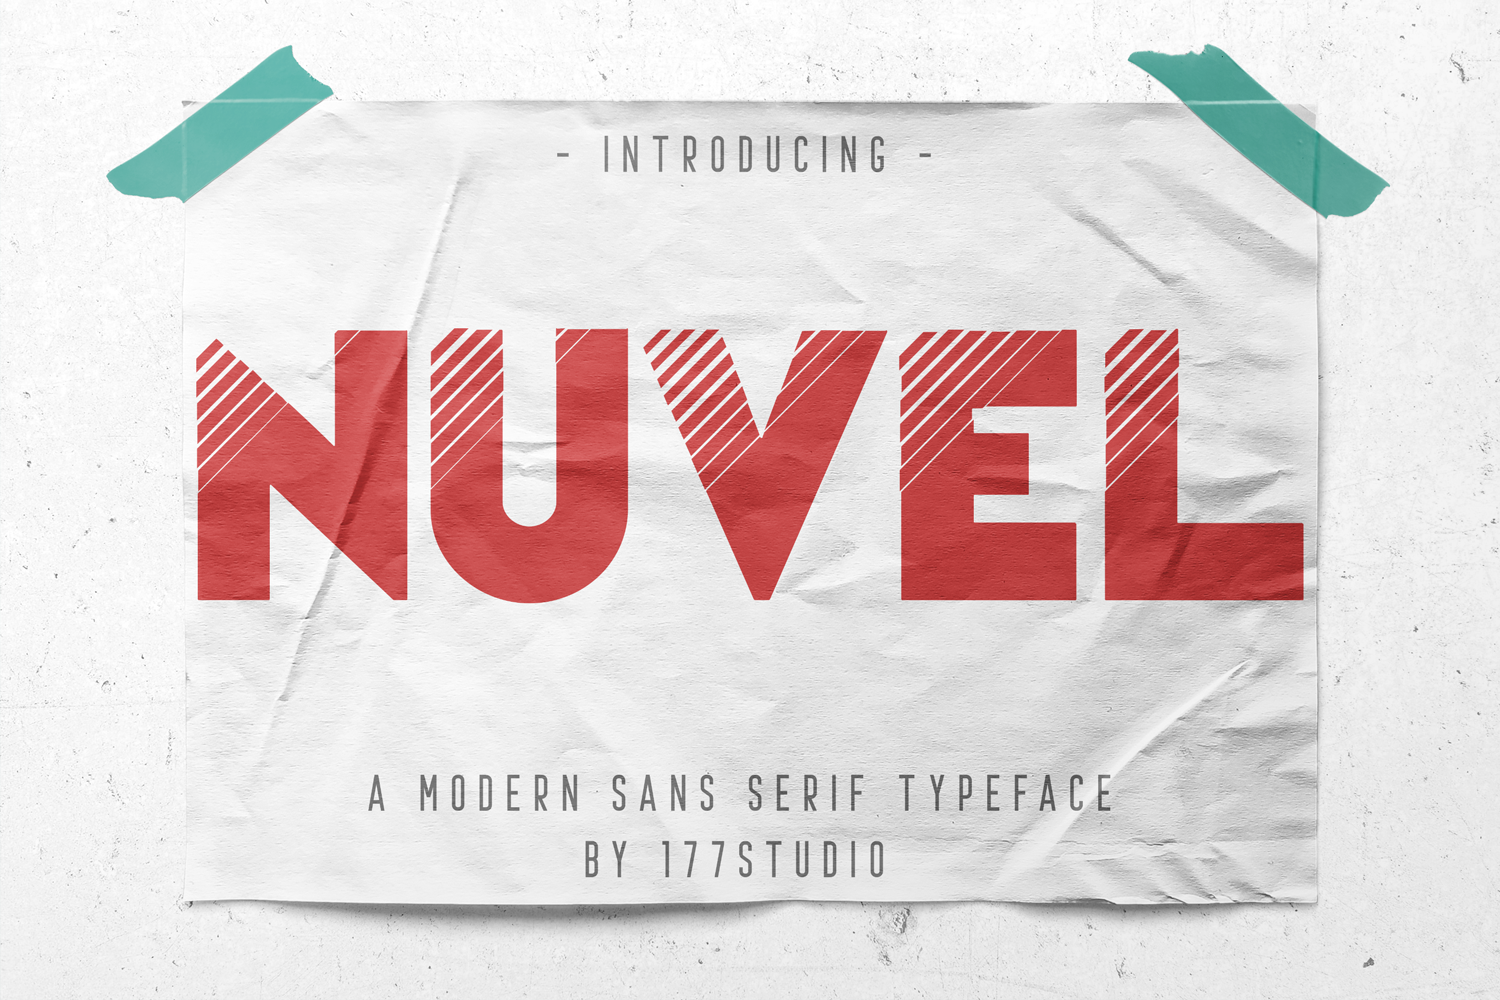 Nuvel